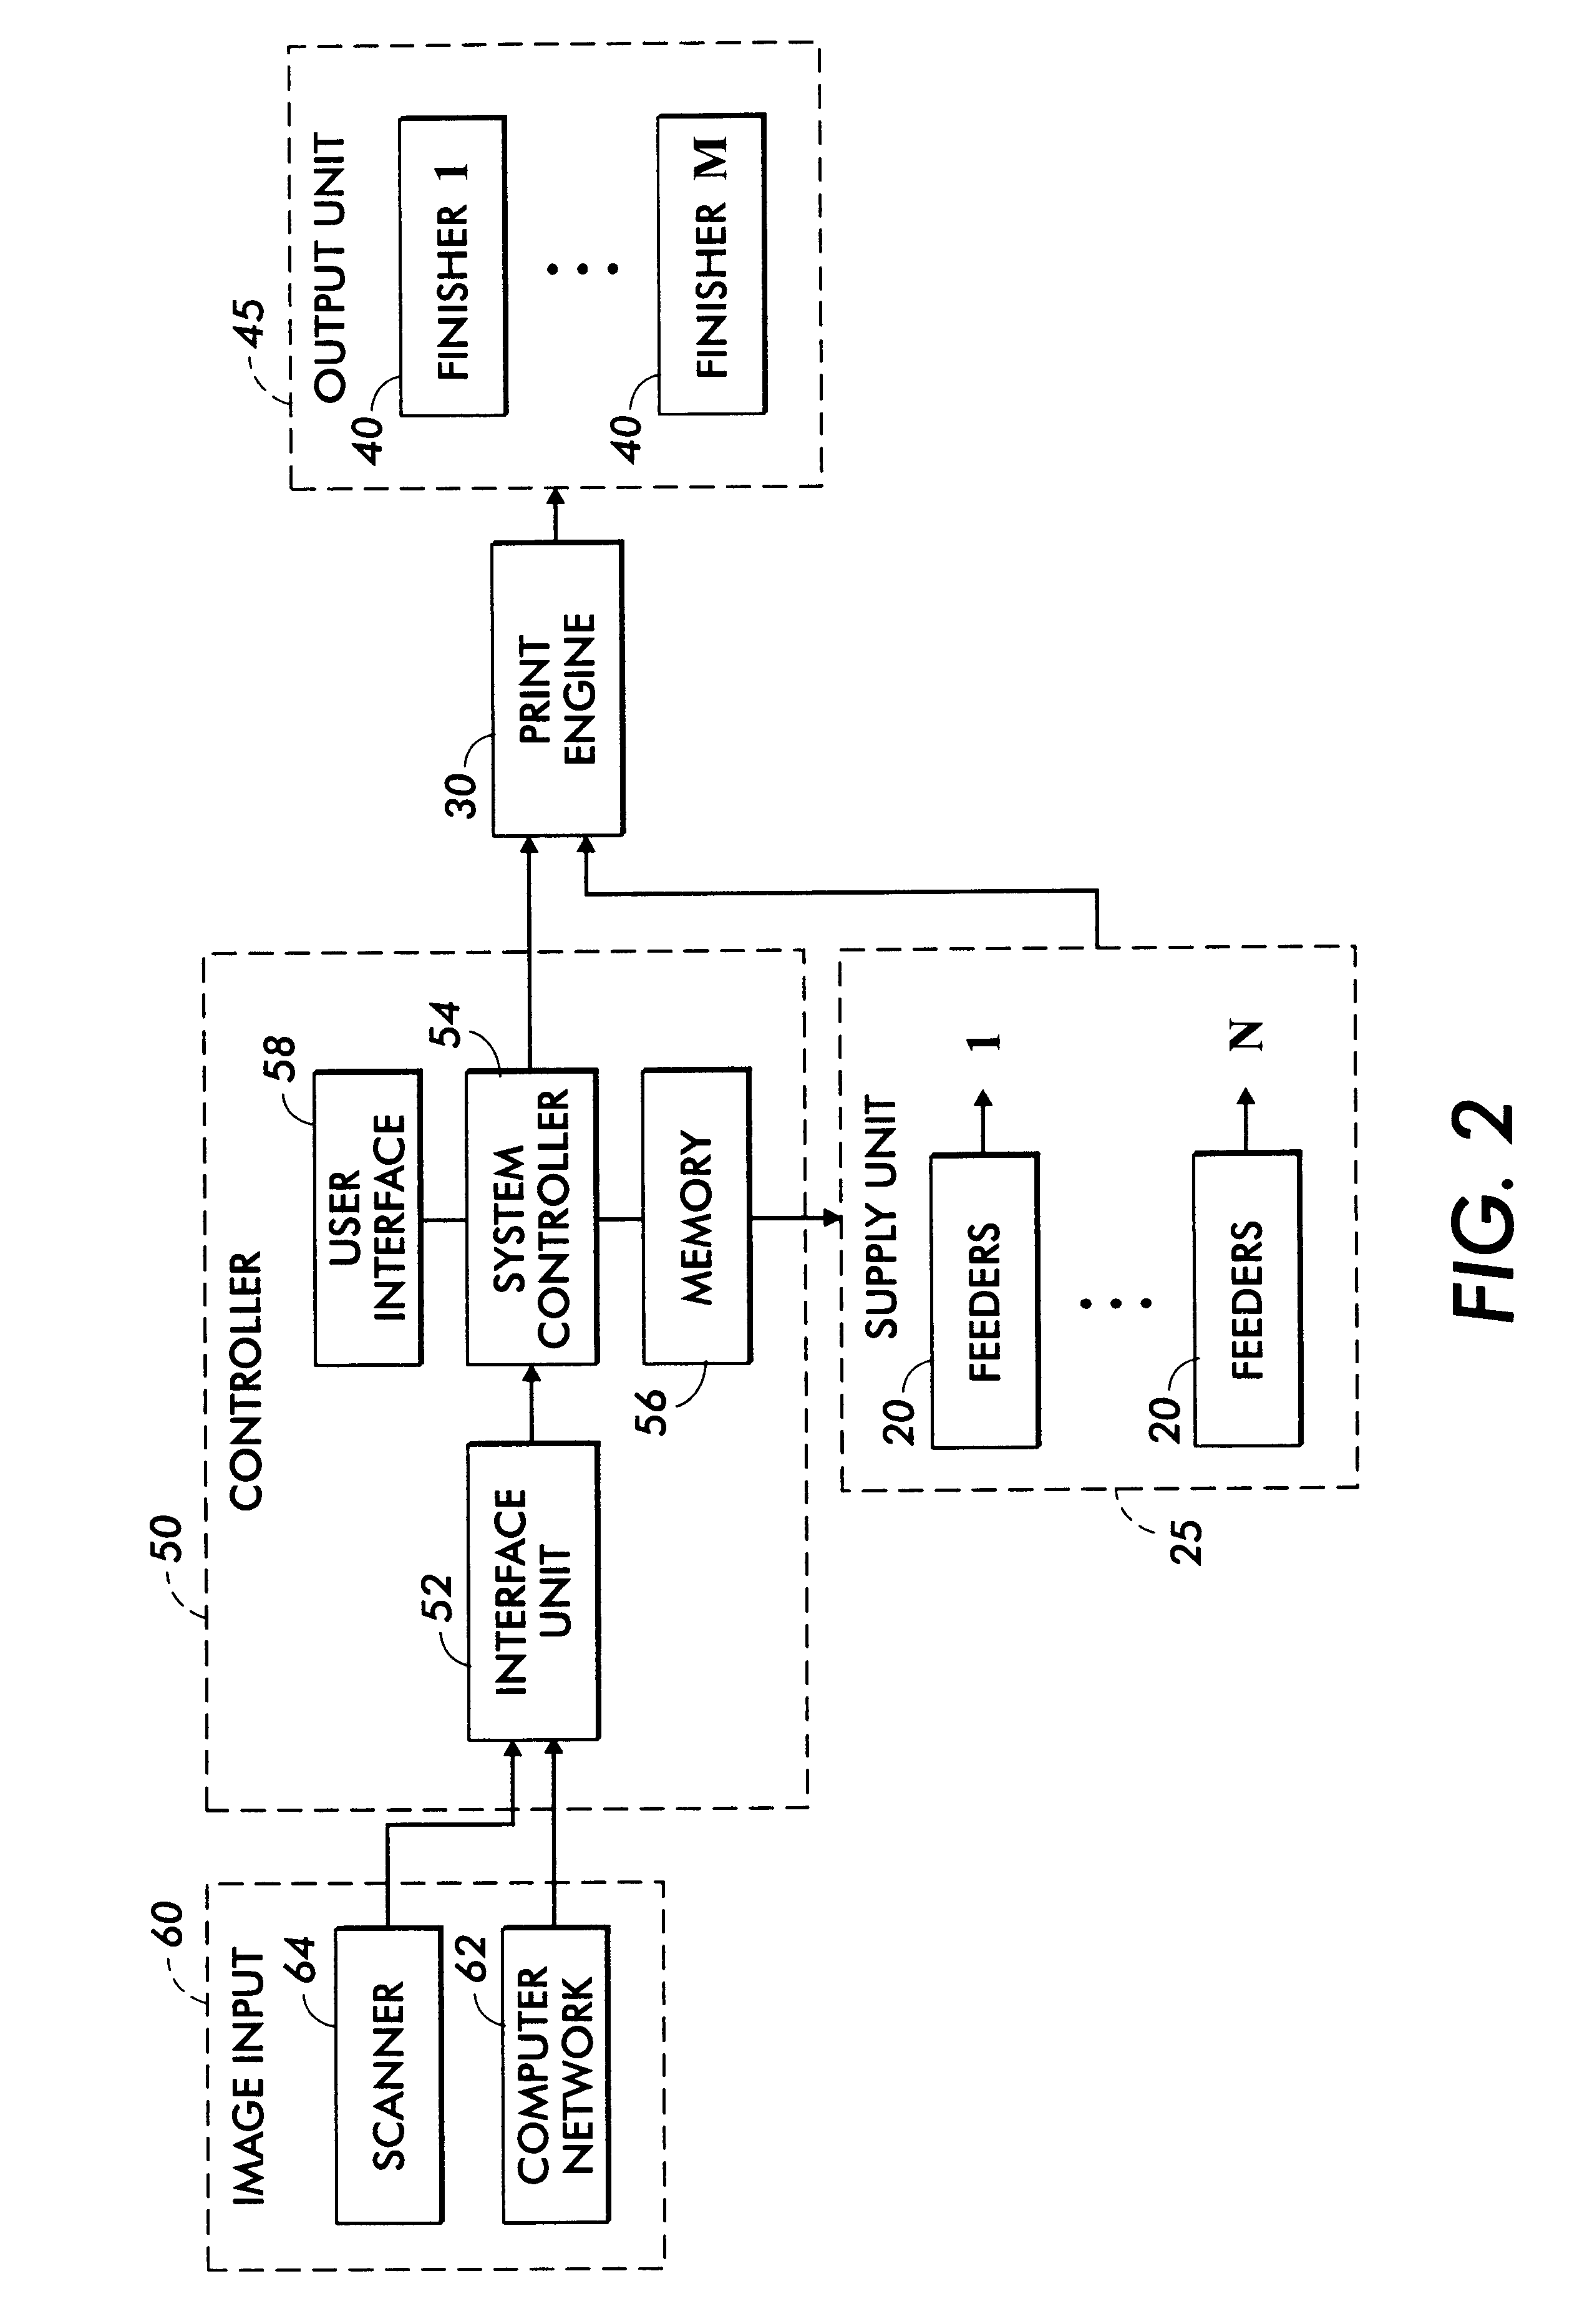 Method for accelerating paper tray programming